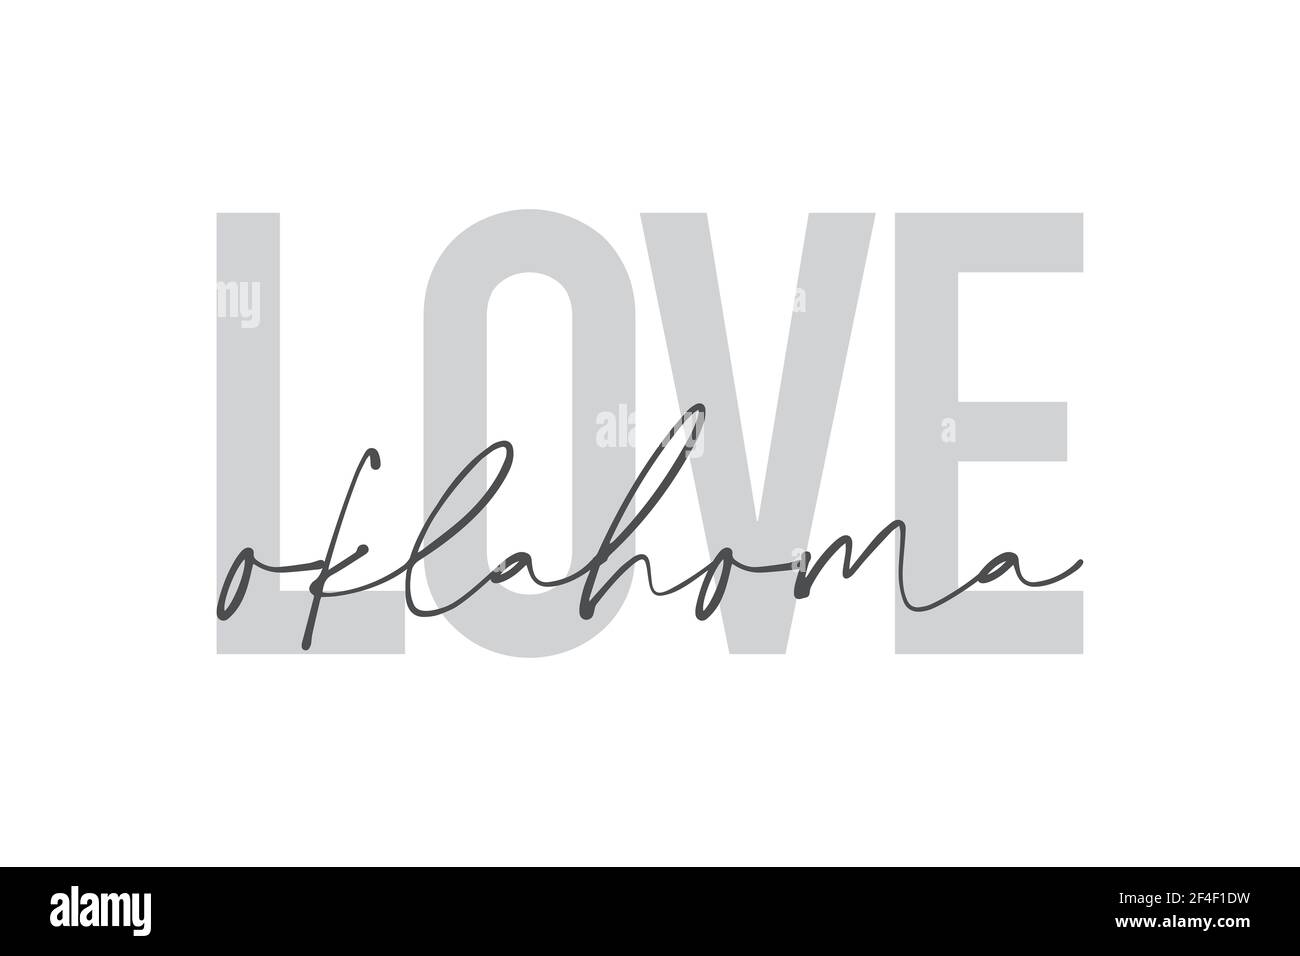 Modern, urban, simple graphic design of a saying 'Love Oklahoma' in grey colors. Trendy, cool, handwritten typography Stock Photo